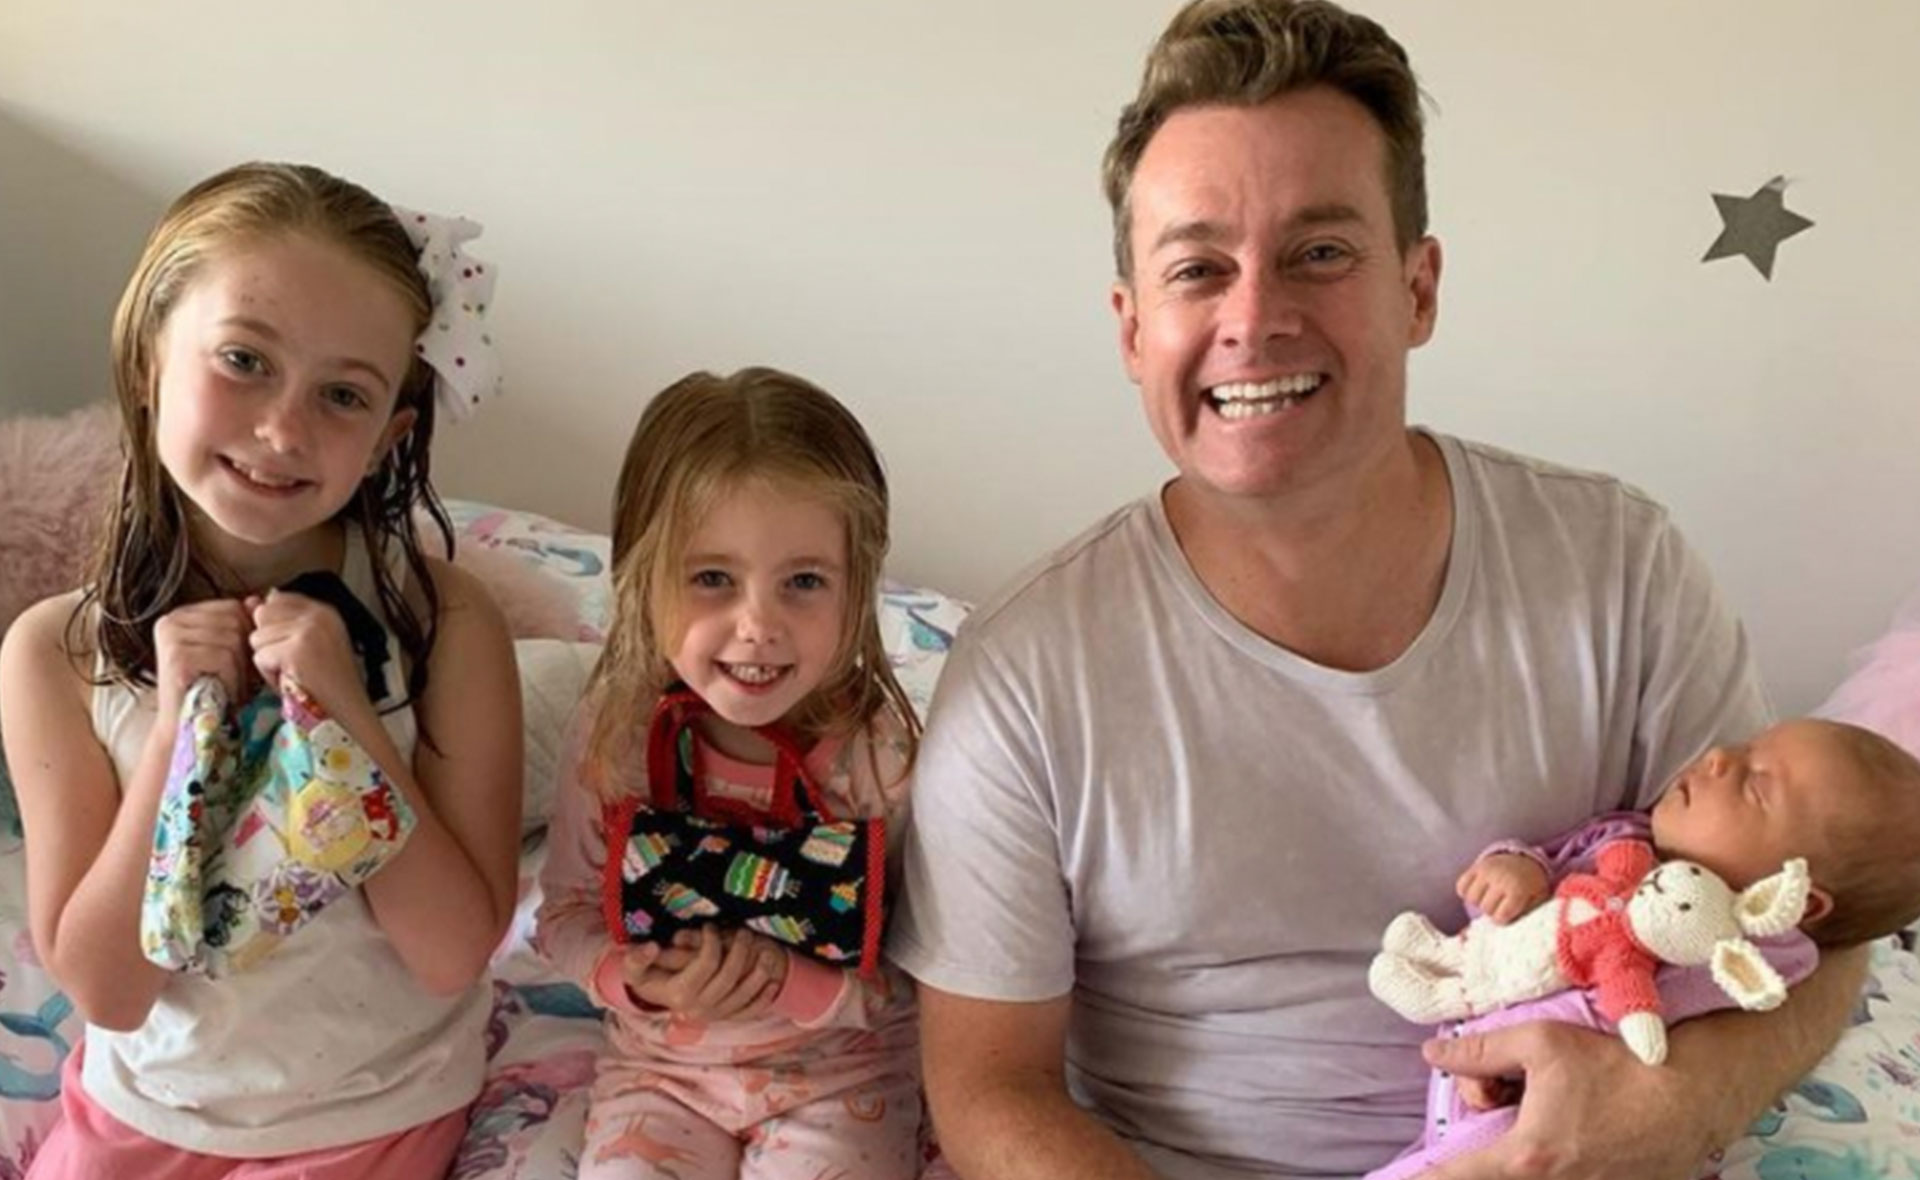 He’s the busiest man in showbiz, but Grant Denyer’s favourite role is Dad: See his adorable family album